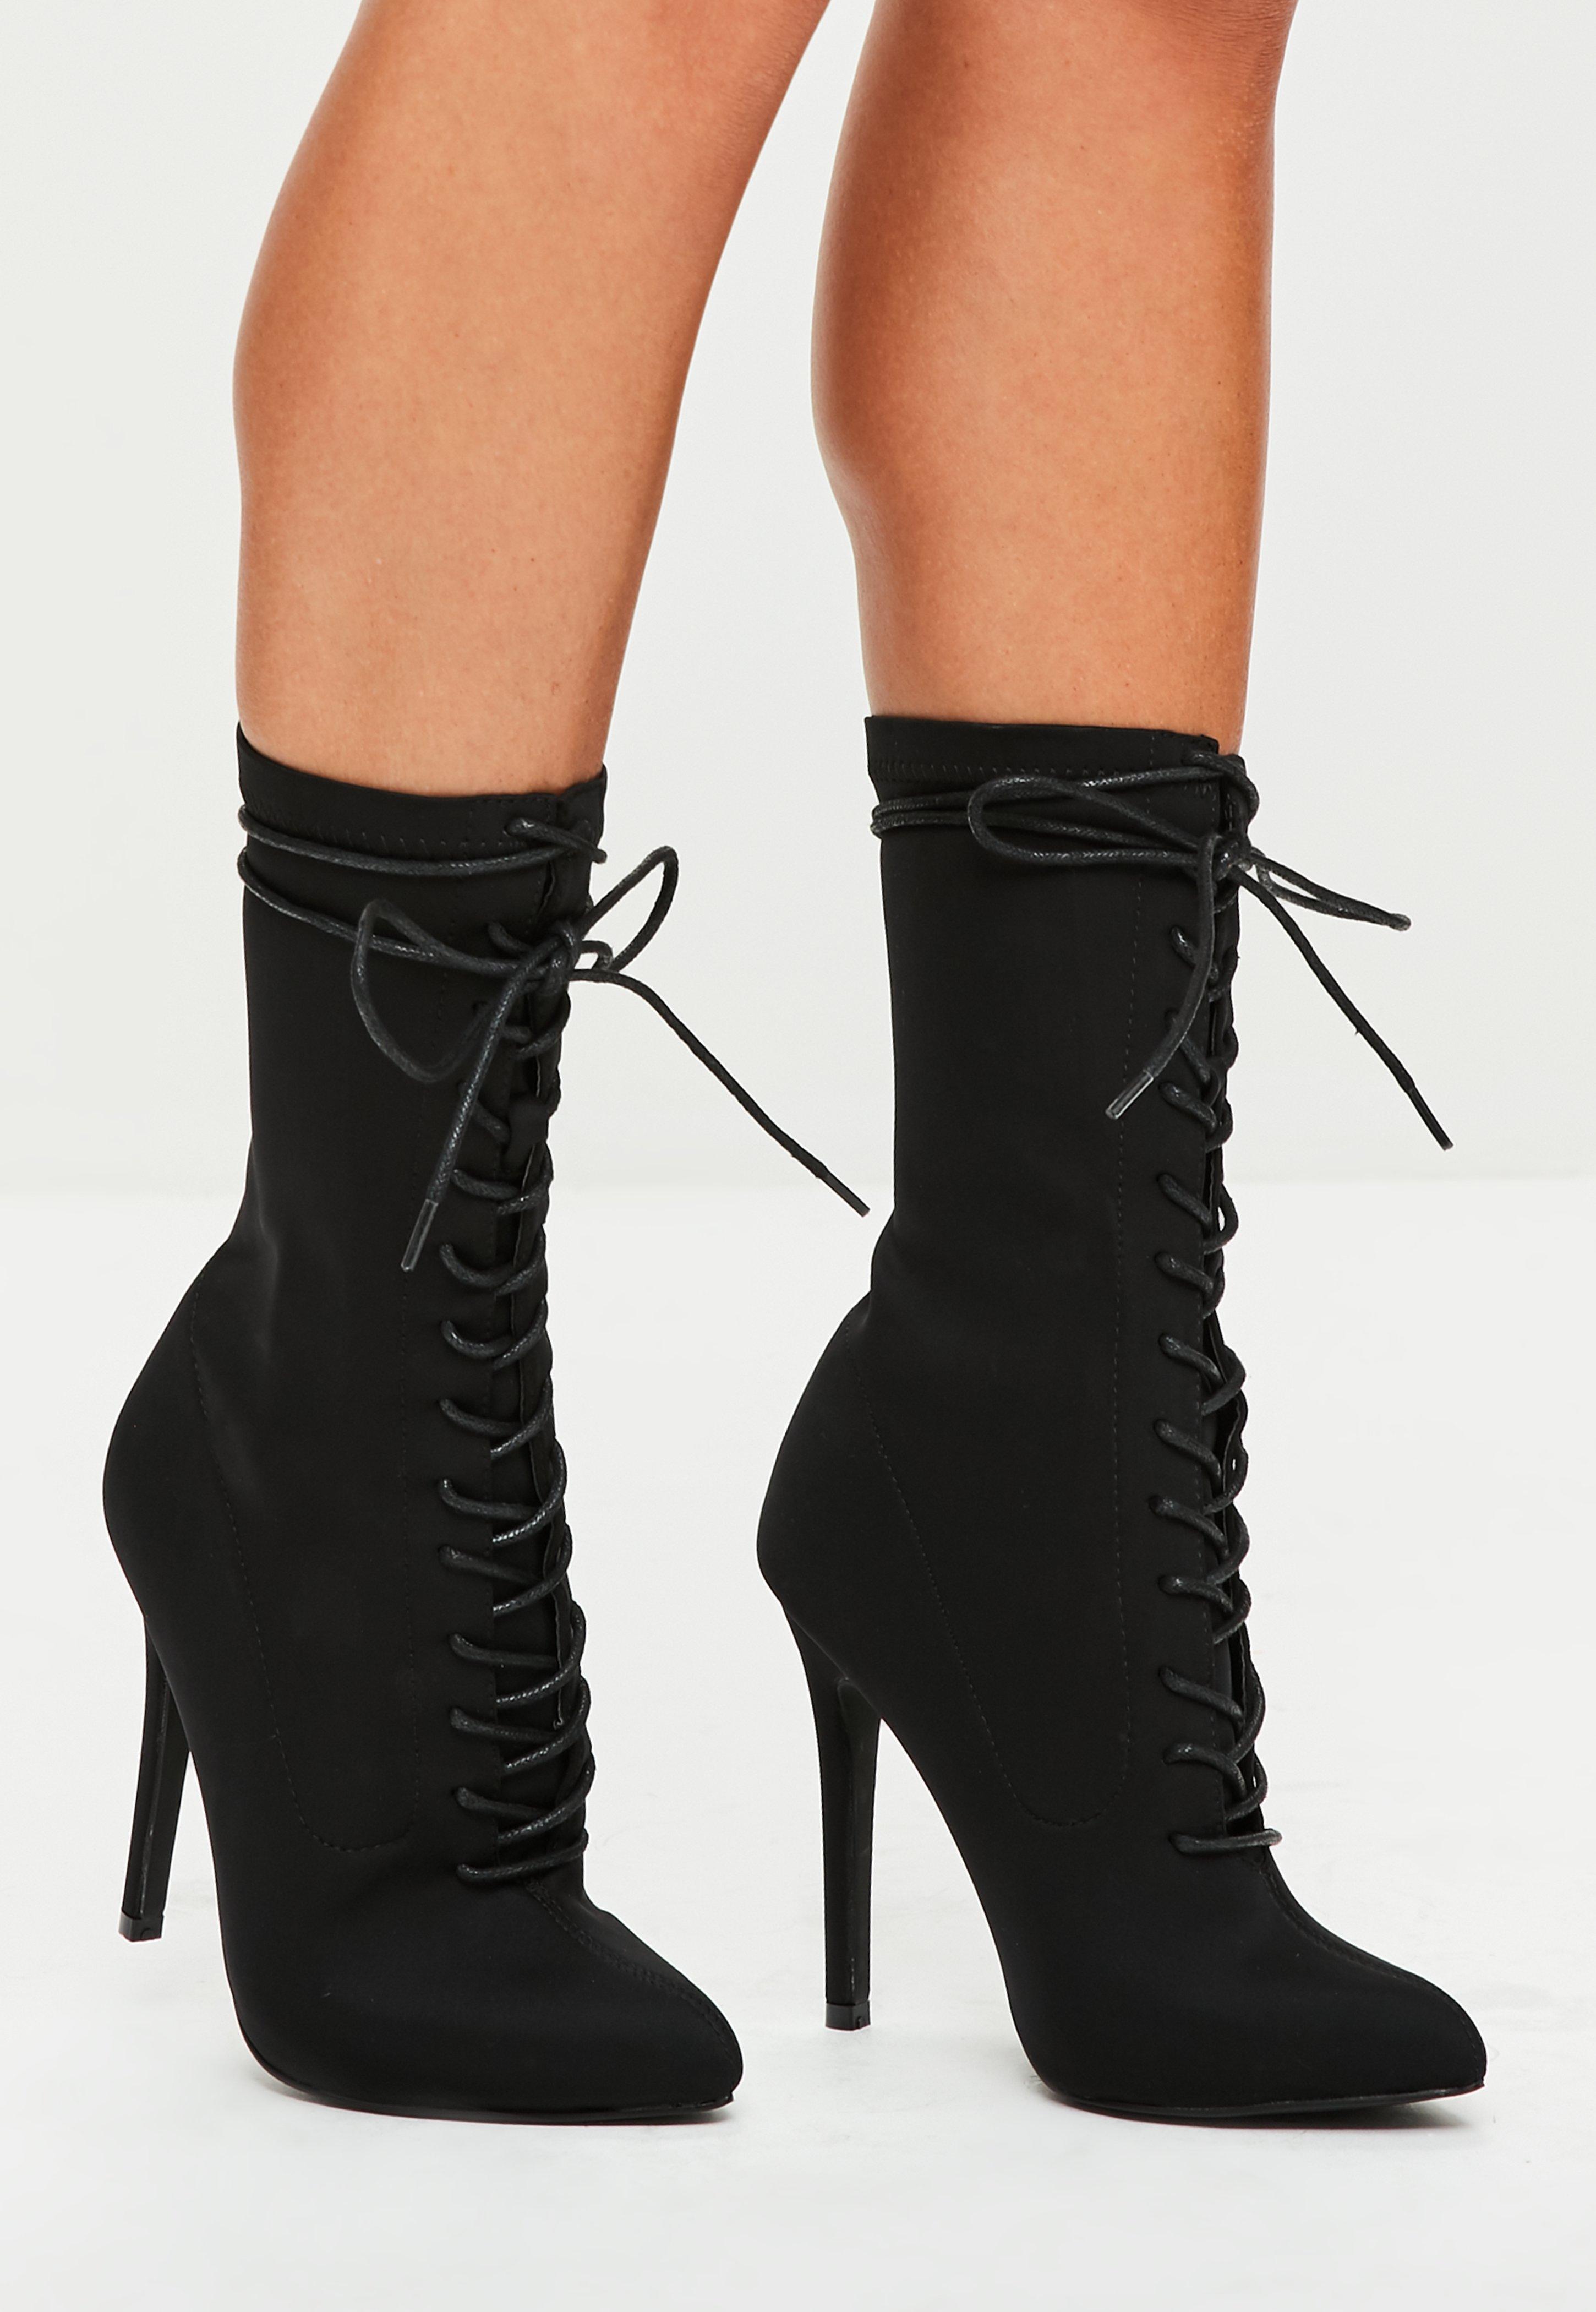 Lyst - Missguided Black Corset Lace Up Pointed Boots in Black